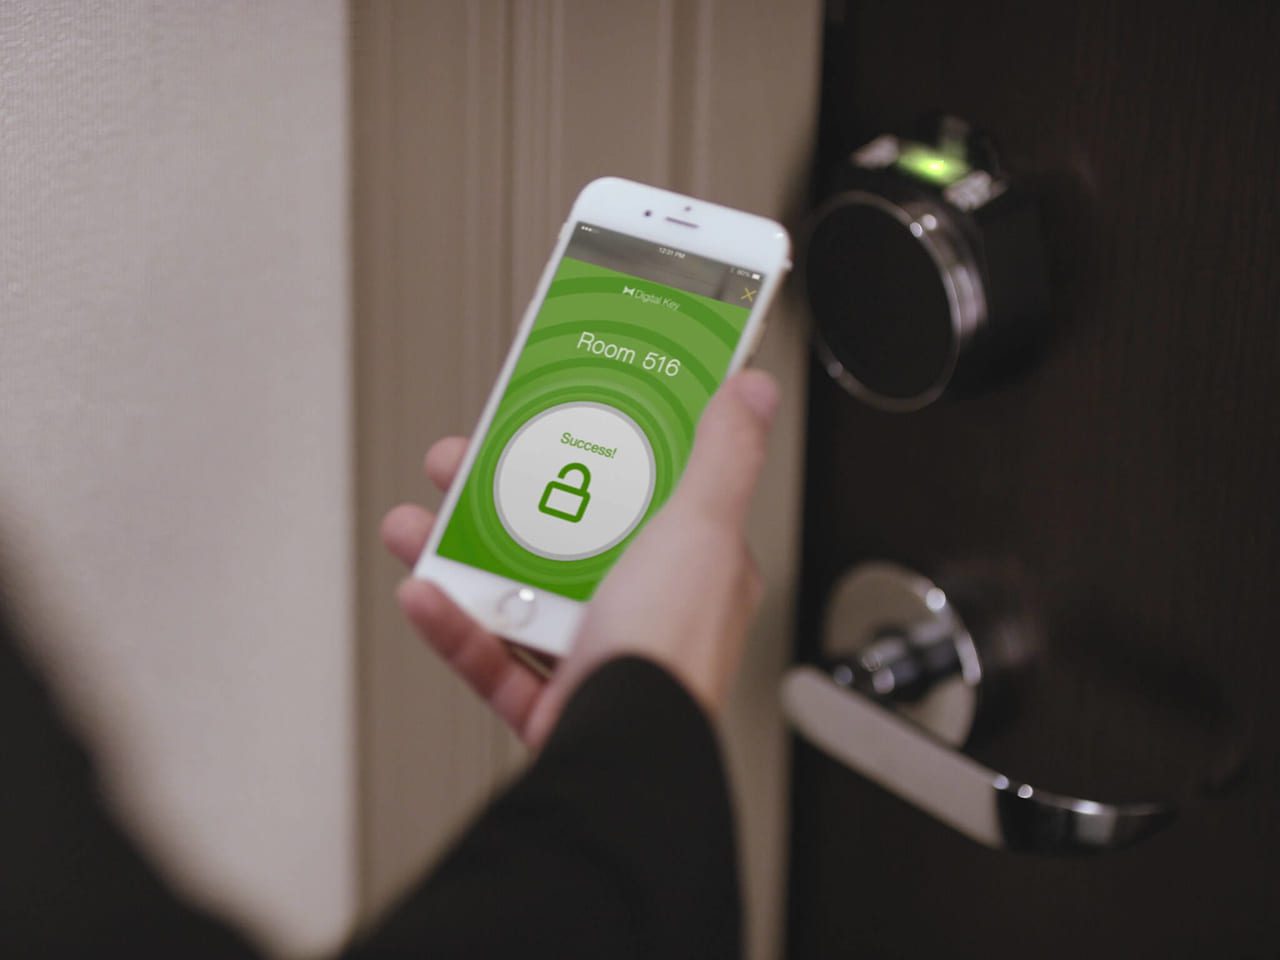 Mobile Loyalty App allows using your device as a room key